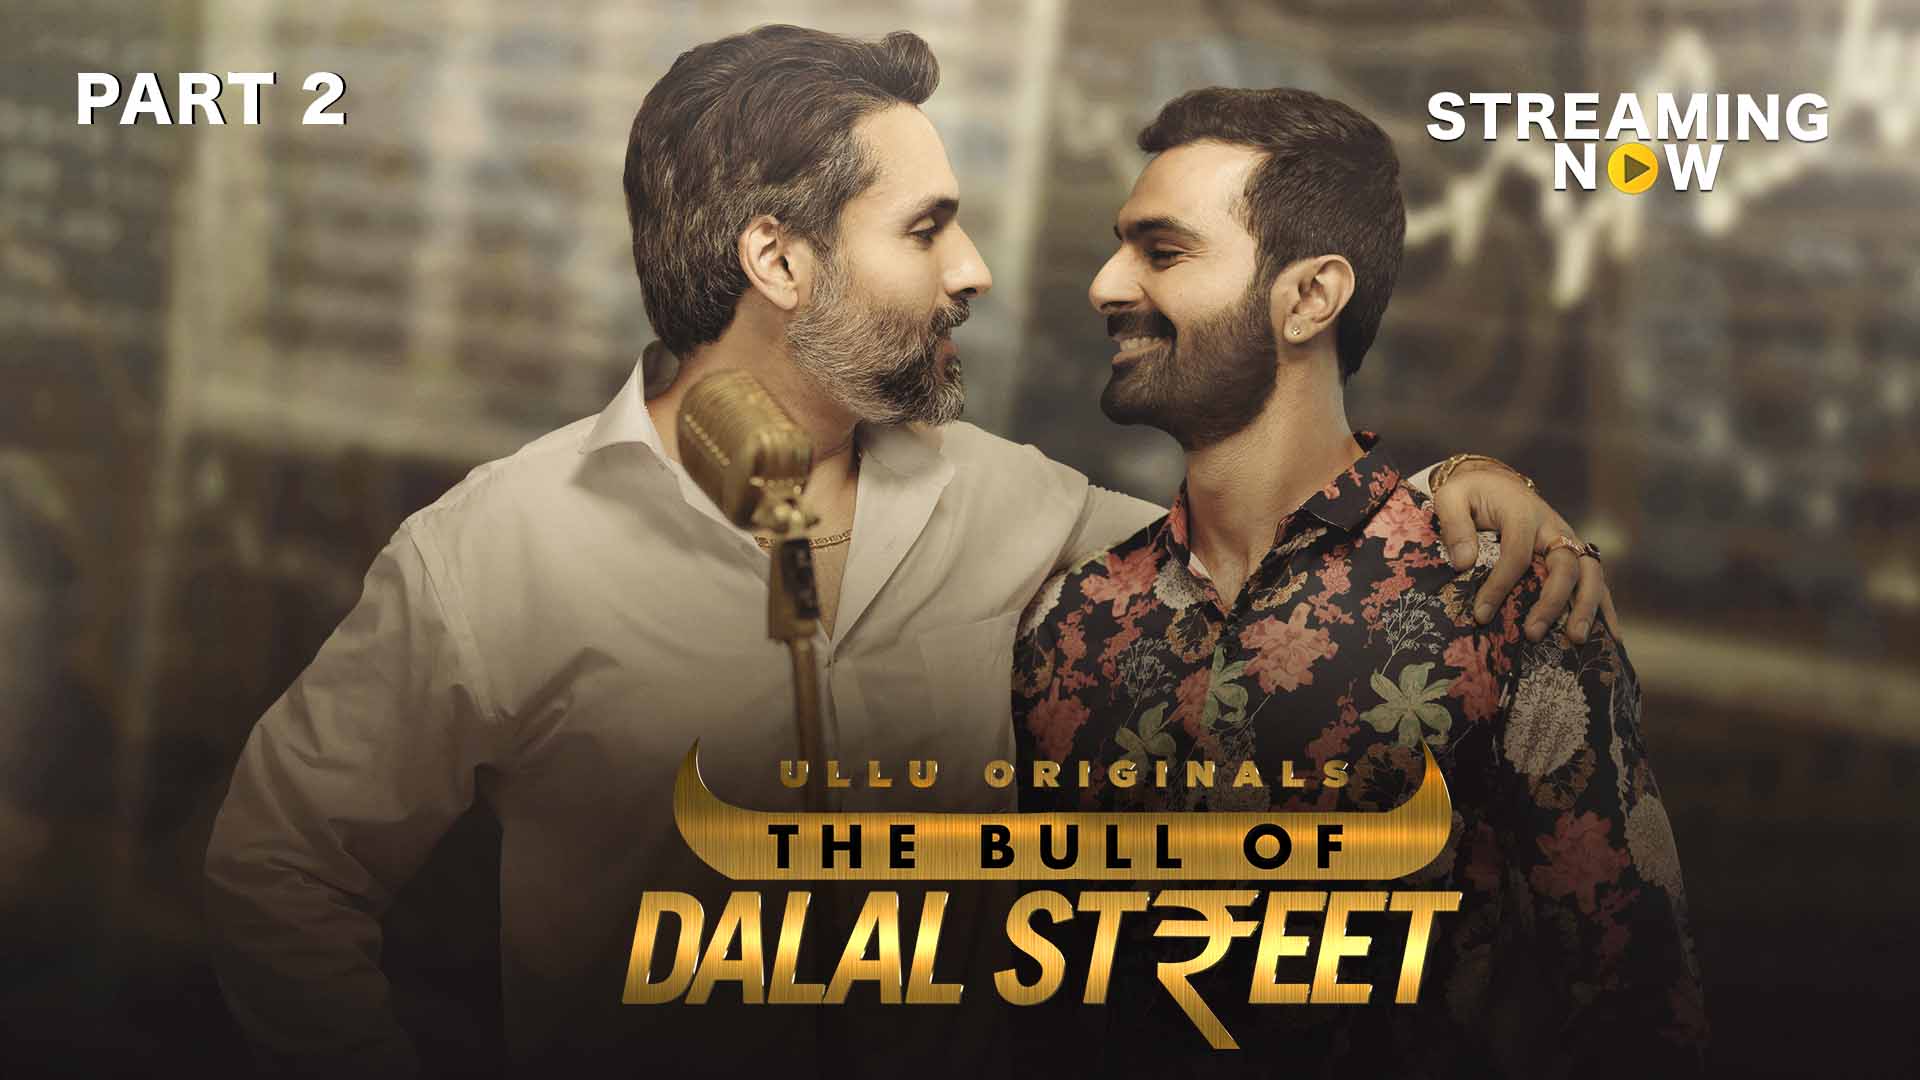 The Bull Of Dalal Street ( Part 2 ) (2020) Hindi WEB-DL - 720P | 1080P - x264 - 200MB | 400MB - Download & Watch Online  Movie Poster - mlsbd